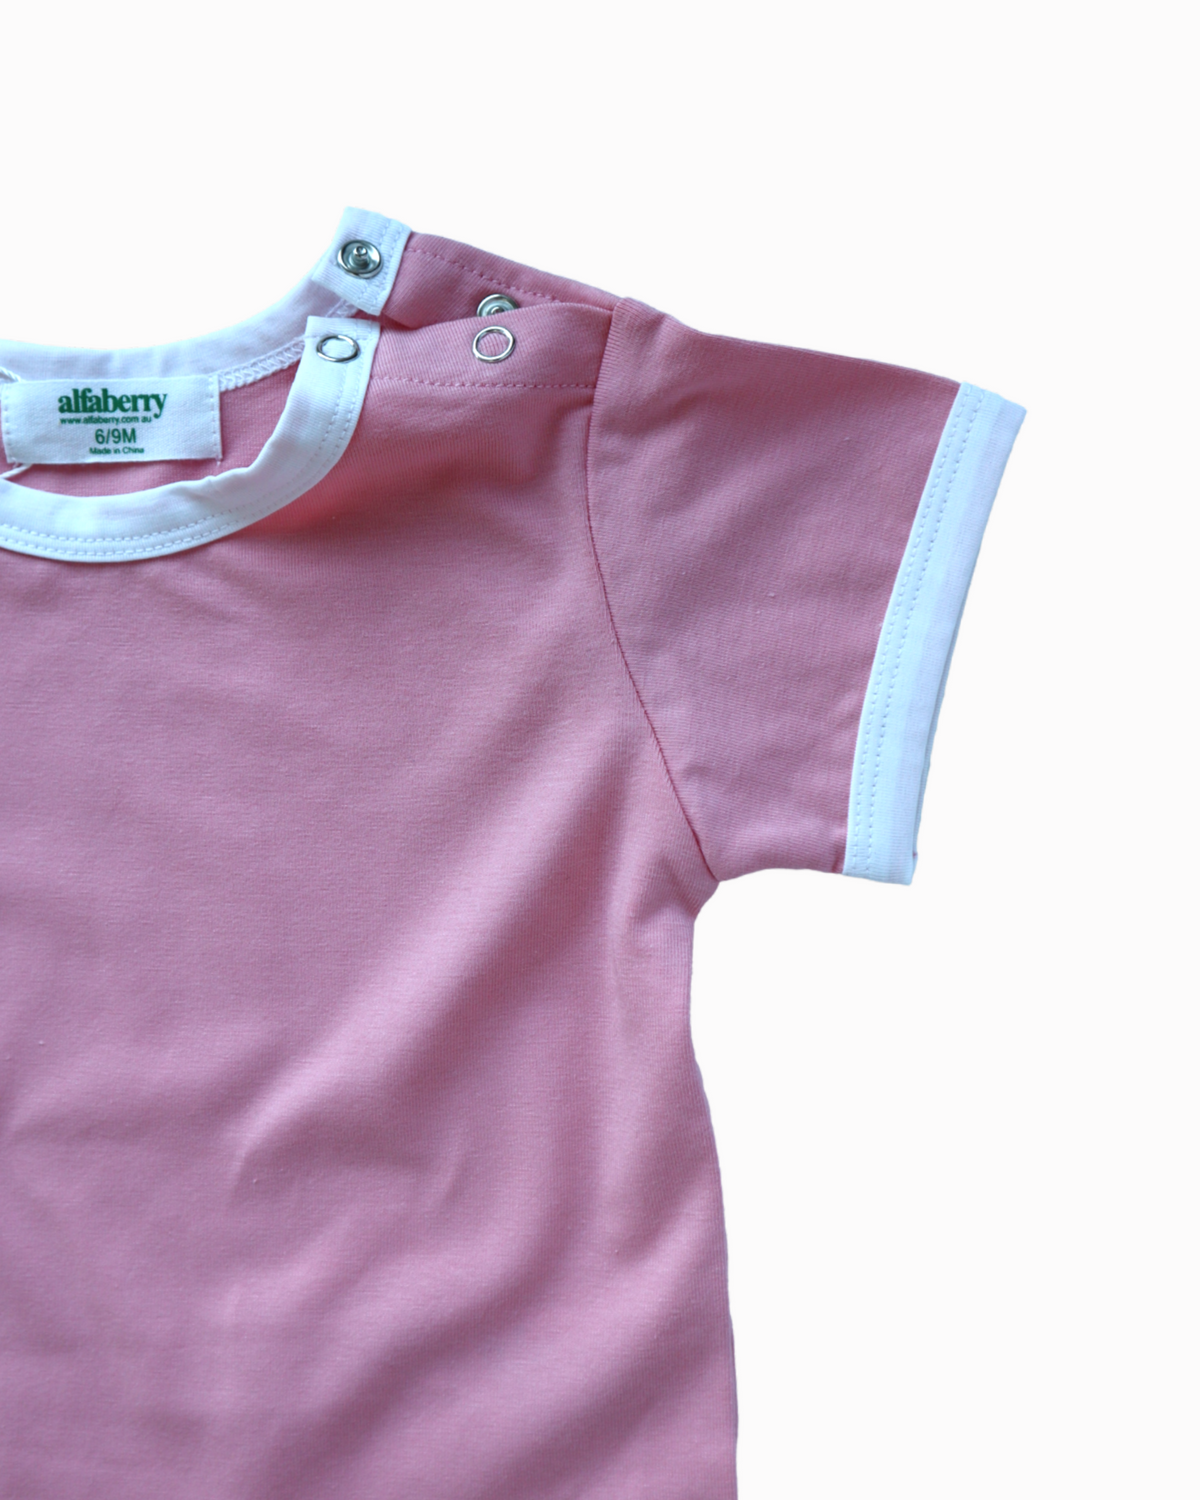 Ringer Tee and Slouch Pant Set in Pink